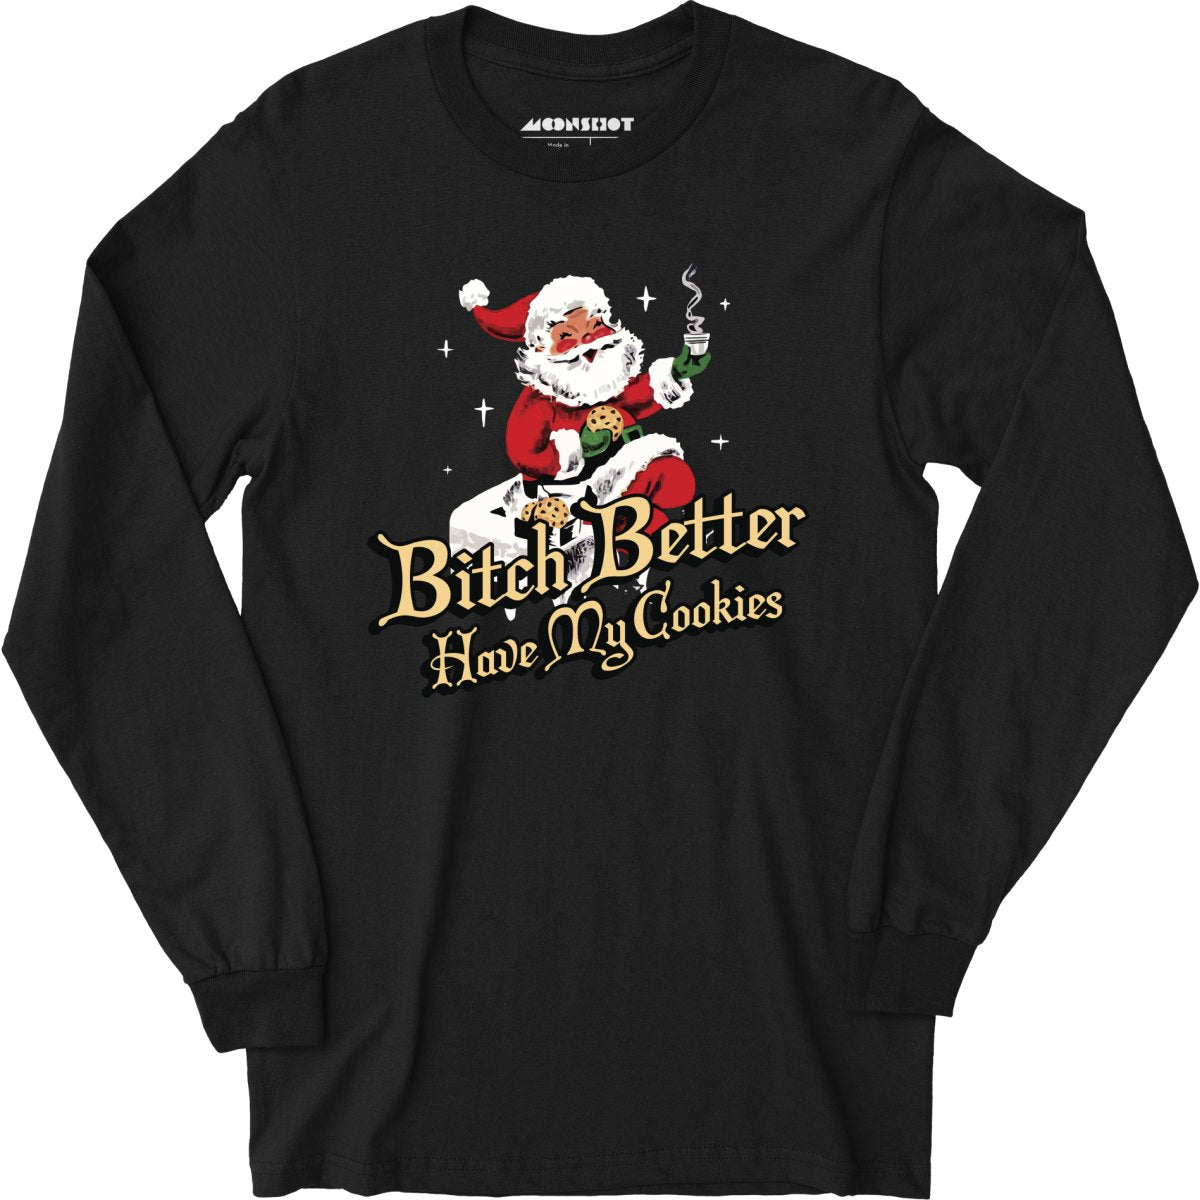 Bitch Better Have My Cookies - Long Sleeve T-Shirt